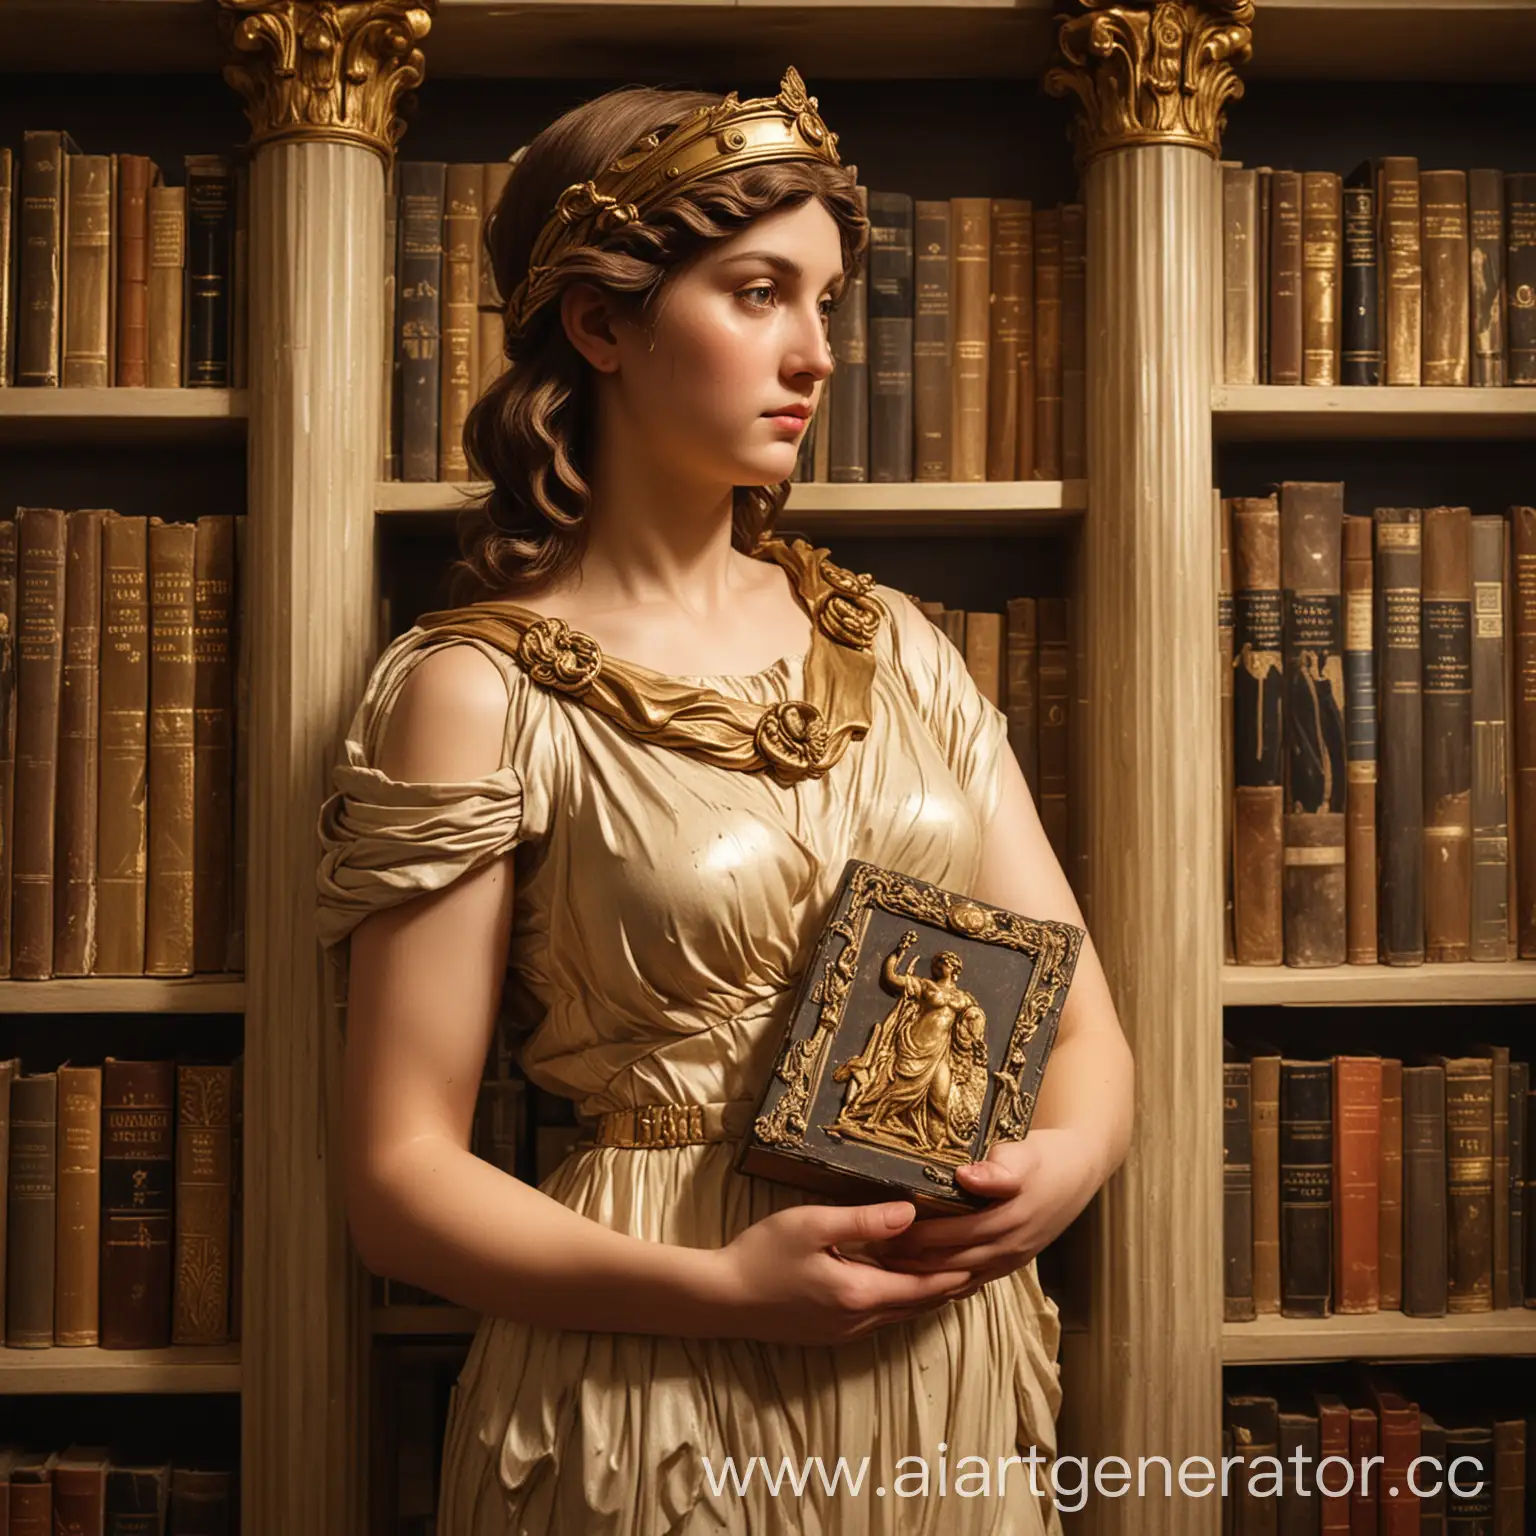 Athena-Holding-a-Book-in-a-Gilded-Library-Hall